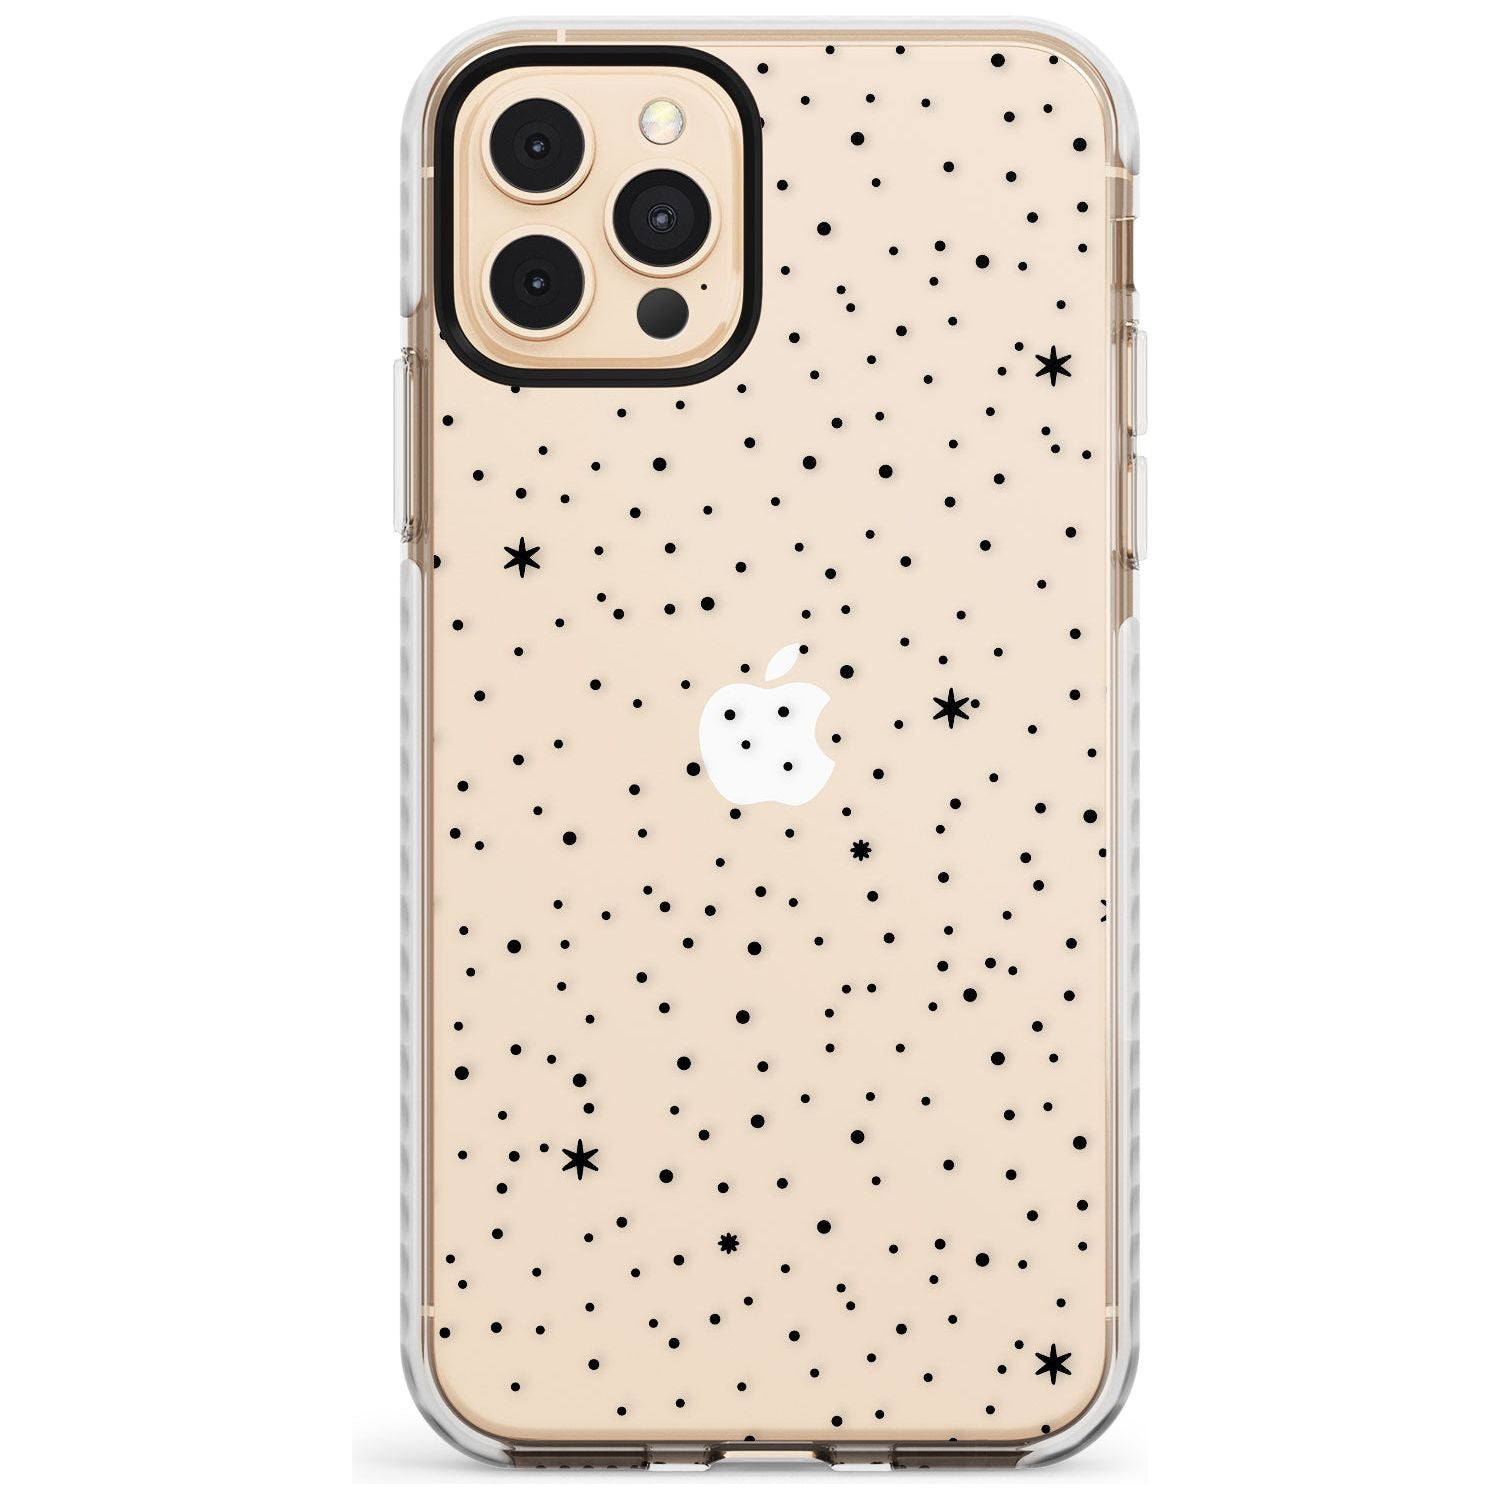 Celestial Starry Sky Slim TPU Phone Case for iPhone 11 Pro Max